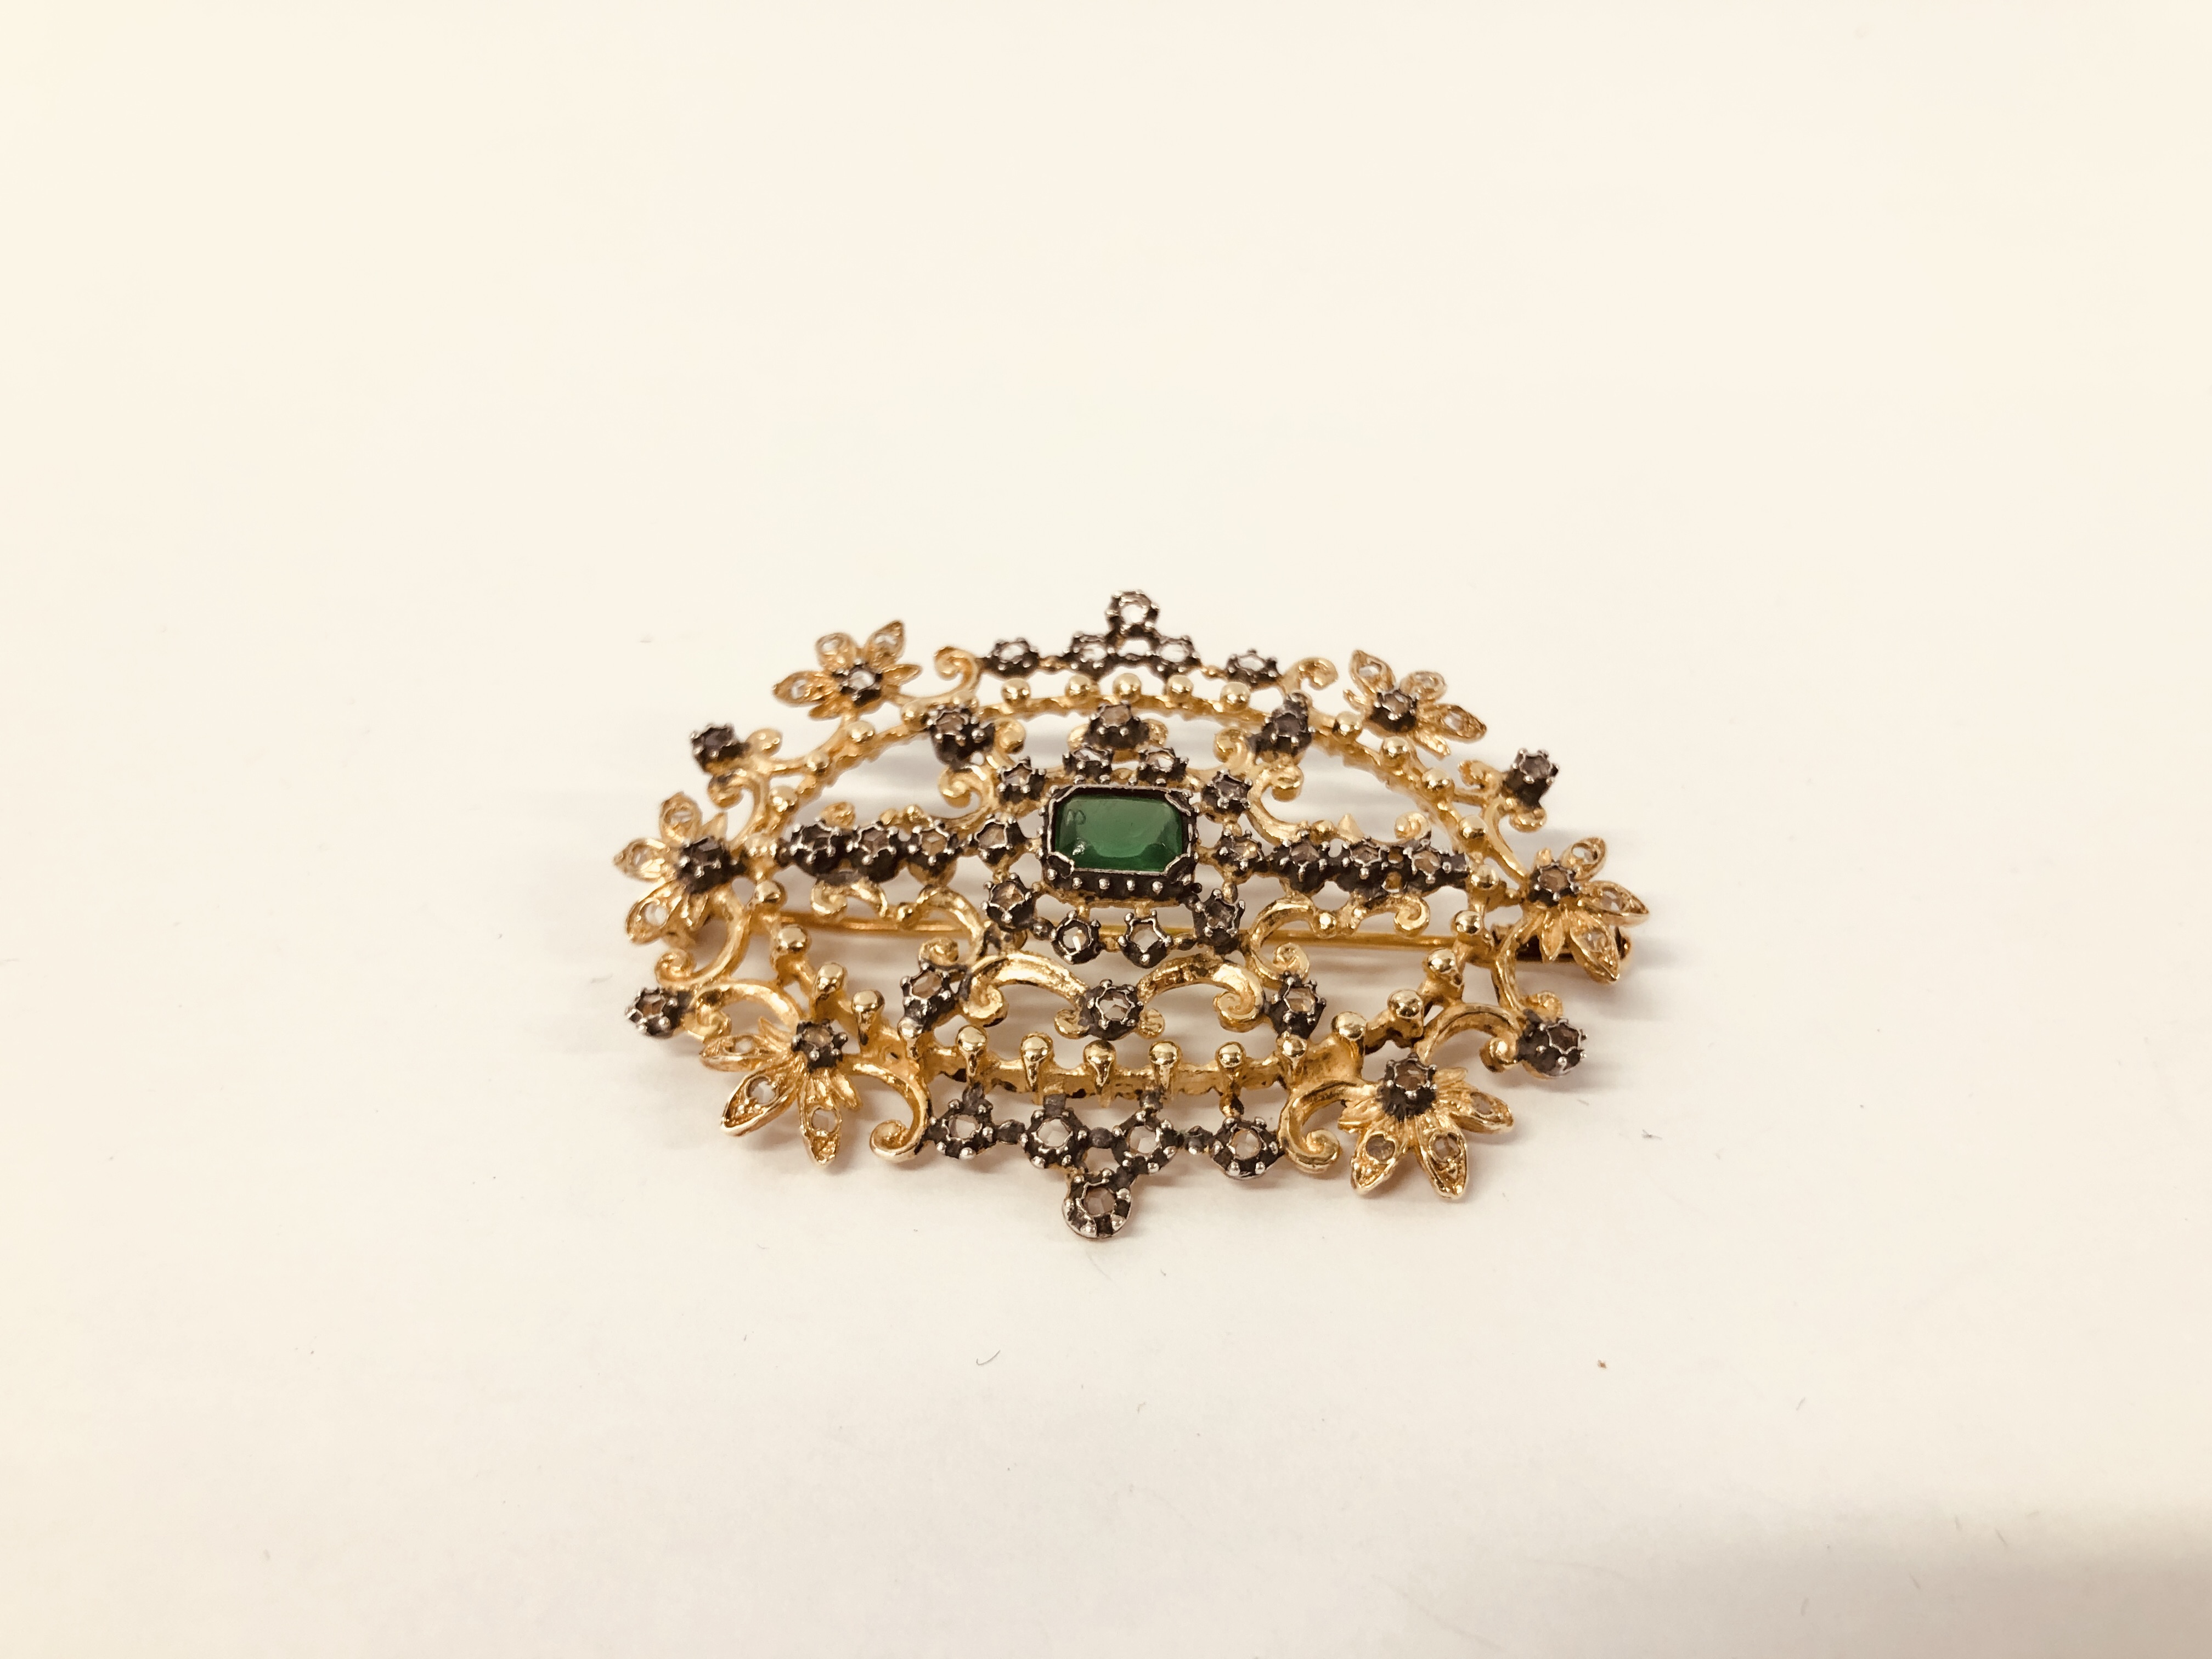 DESIGNER GILT BROOCH SET WITH CENTRAL GREEN STONE AND MULTIPLE CLEAR STONES, MARKED "ART JOY".